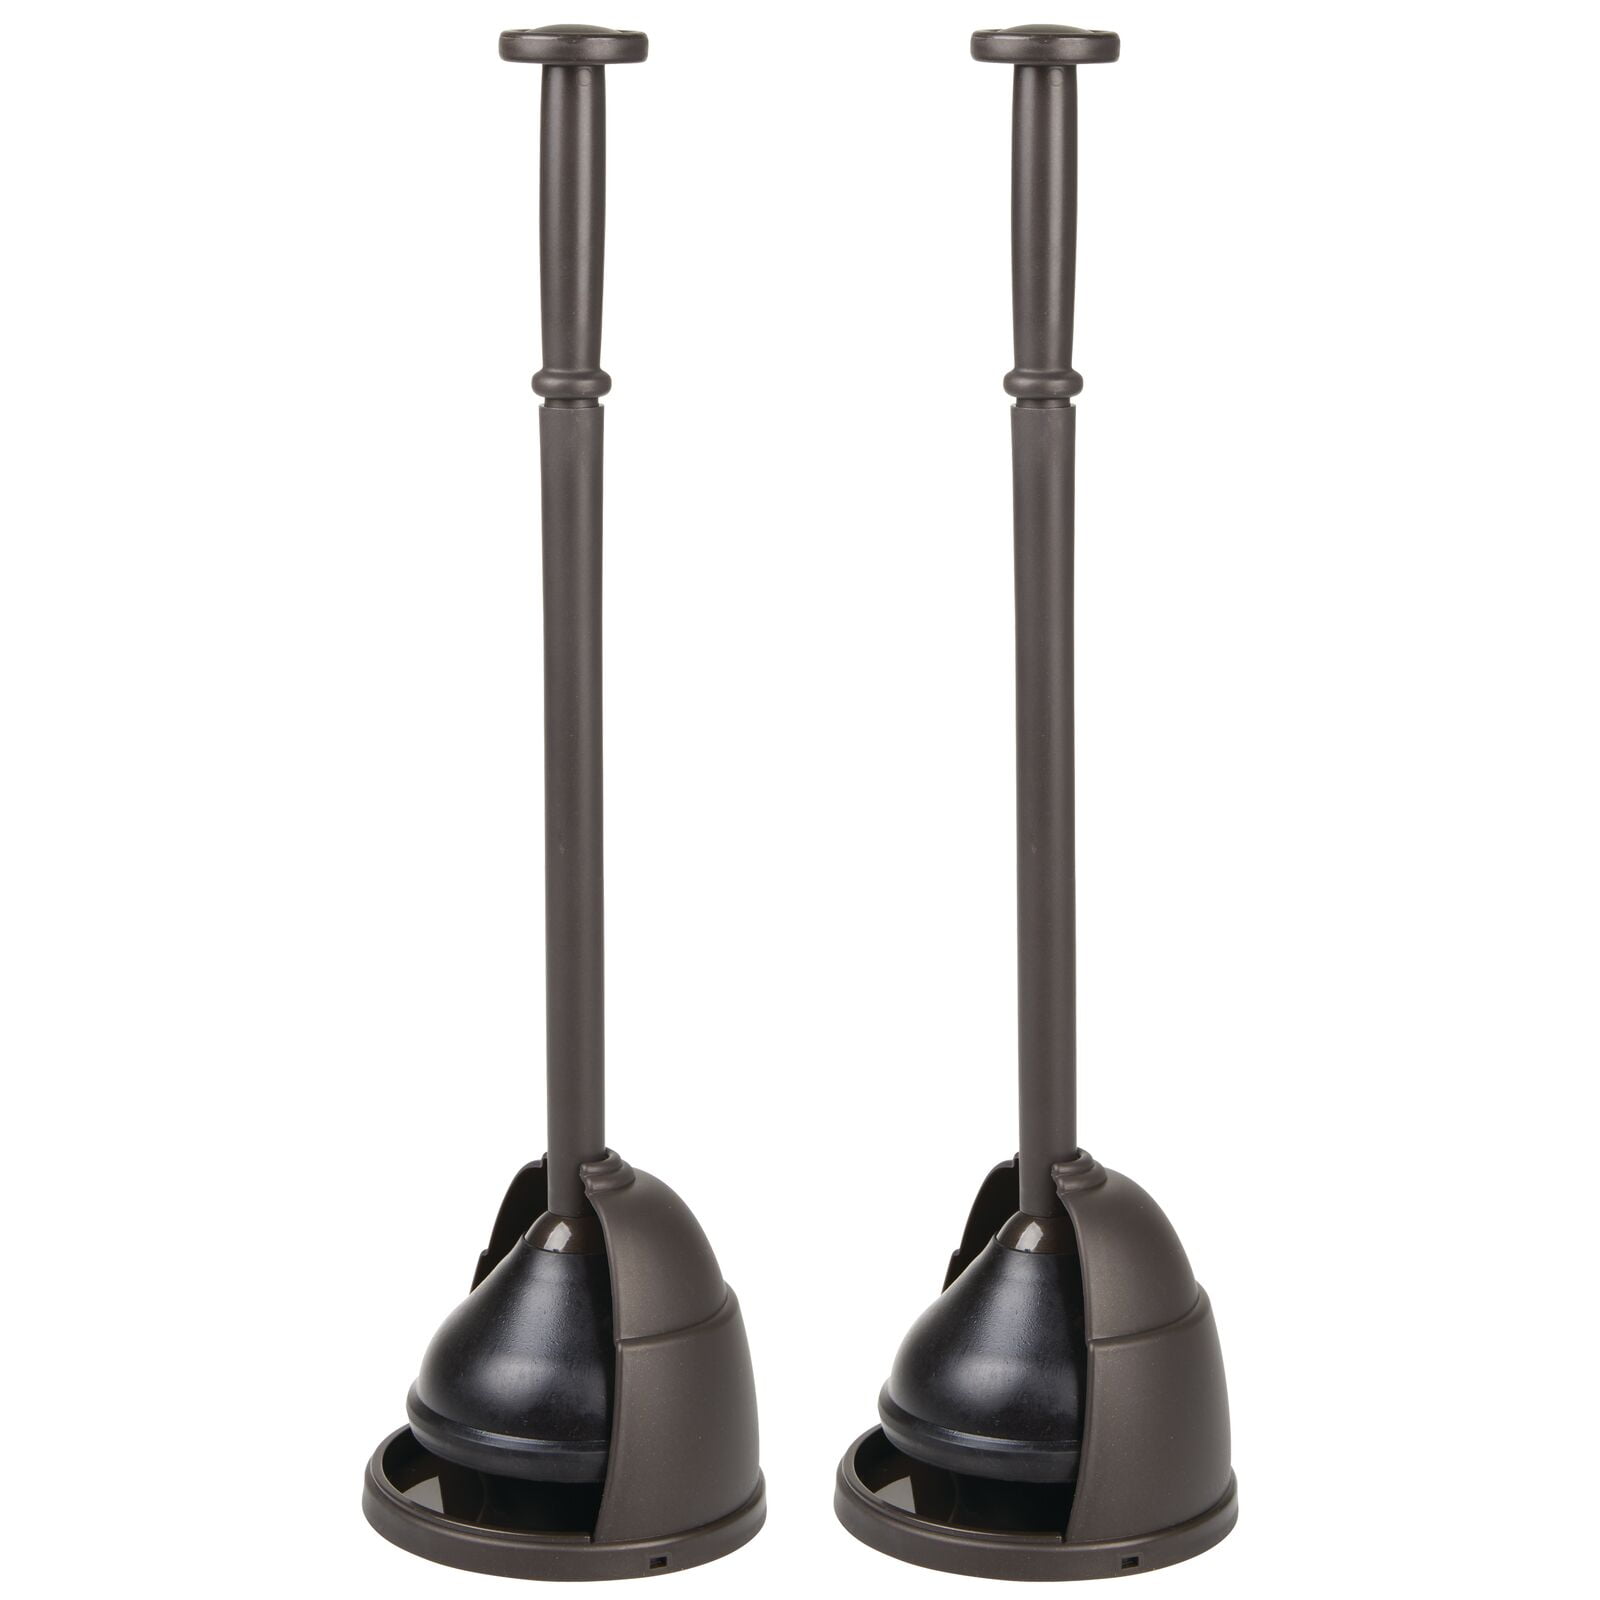 Heavy Duty Compact Discreet Freestanding Storage Caddy with Base Sleek Modern Design mDesign Plastic Bathroom Toilet Bowl Plunger Set with Lift & Lock Cover 2 Pack Charcoal Gray 